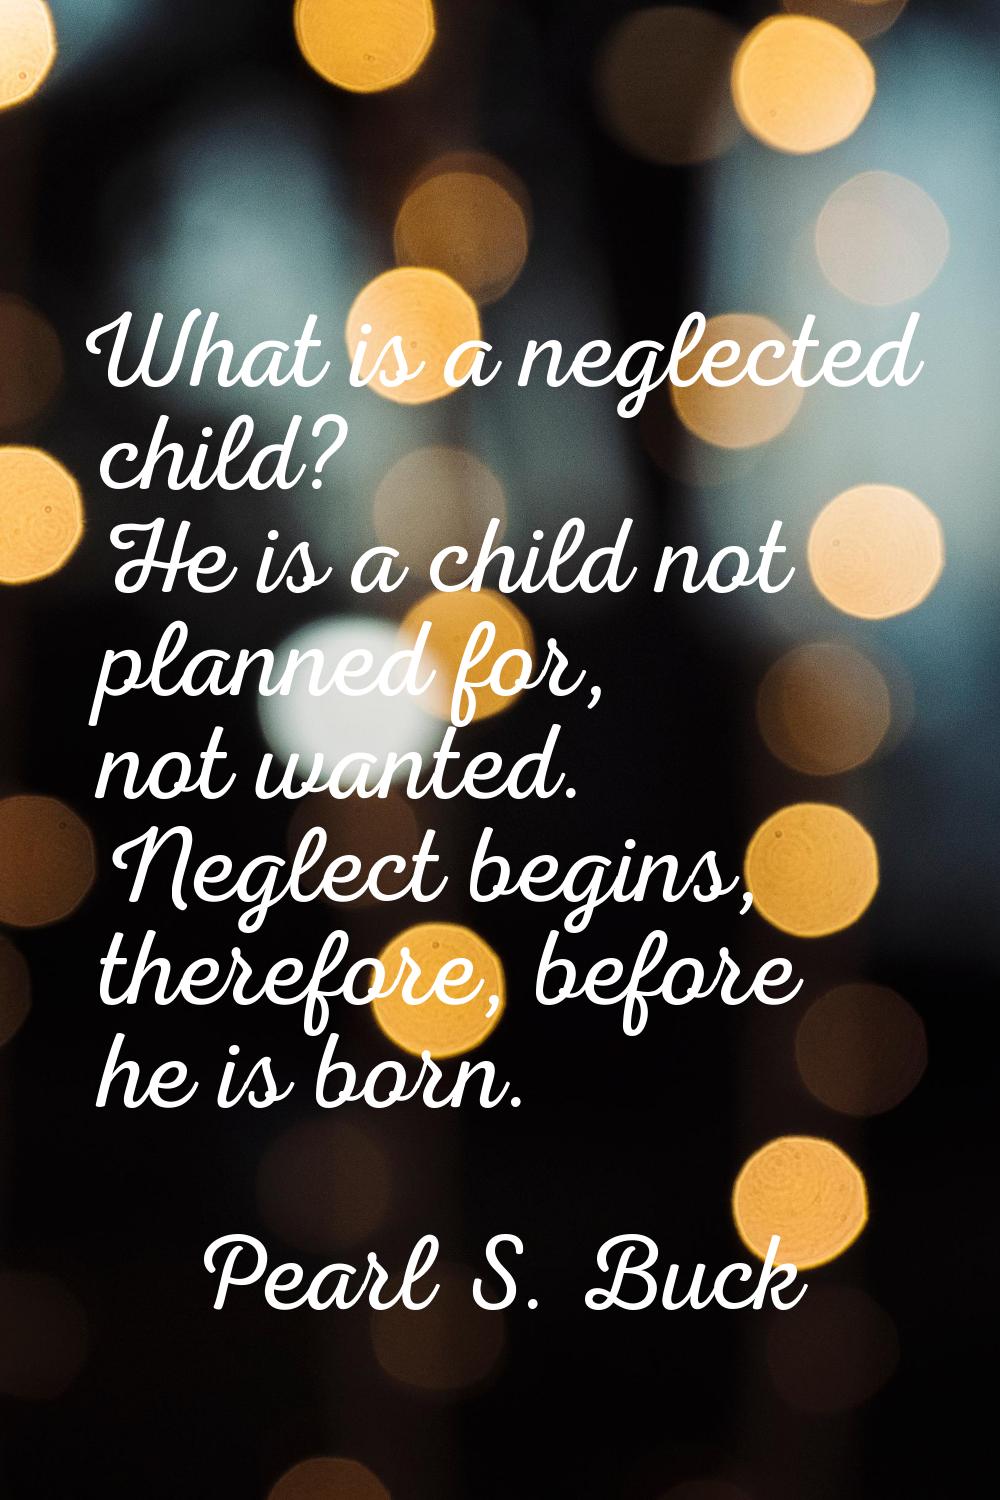 What is a neglected child? He is a child not planned for, not wanted. Neglect begins, therefore, be